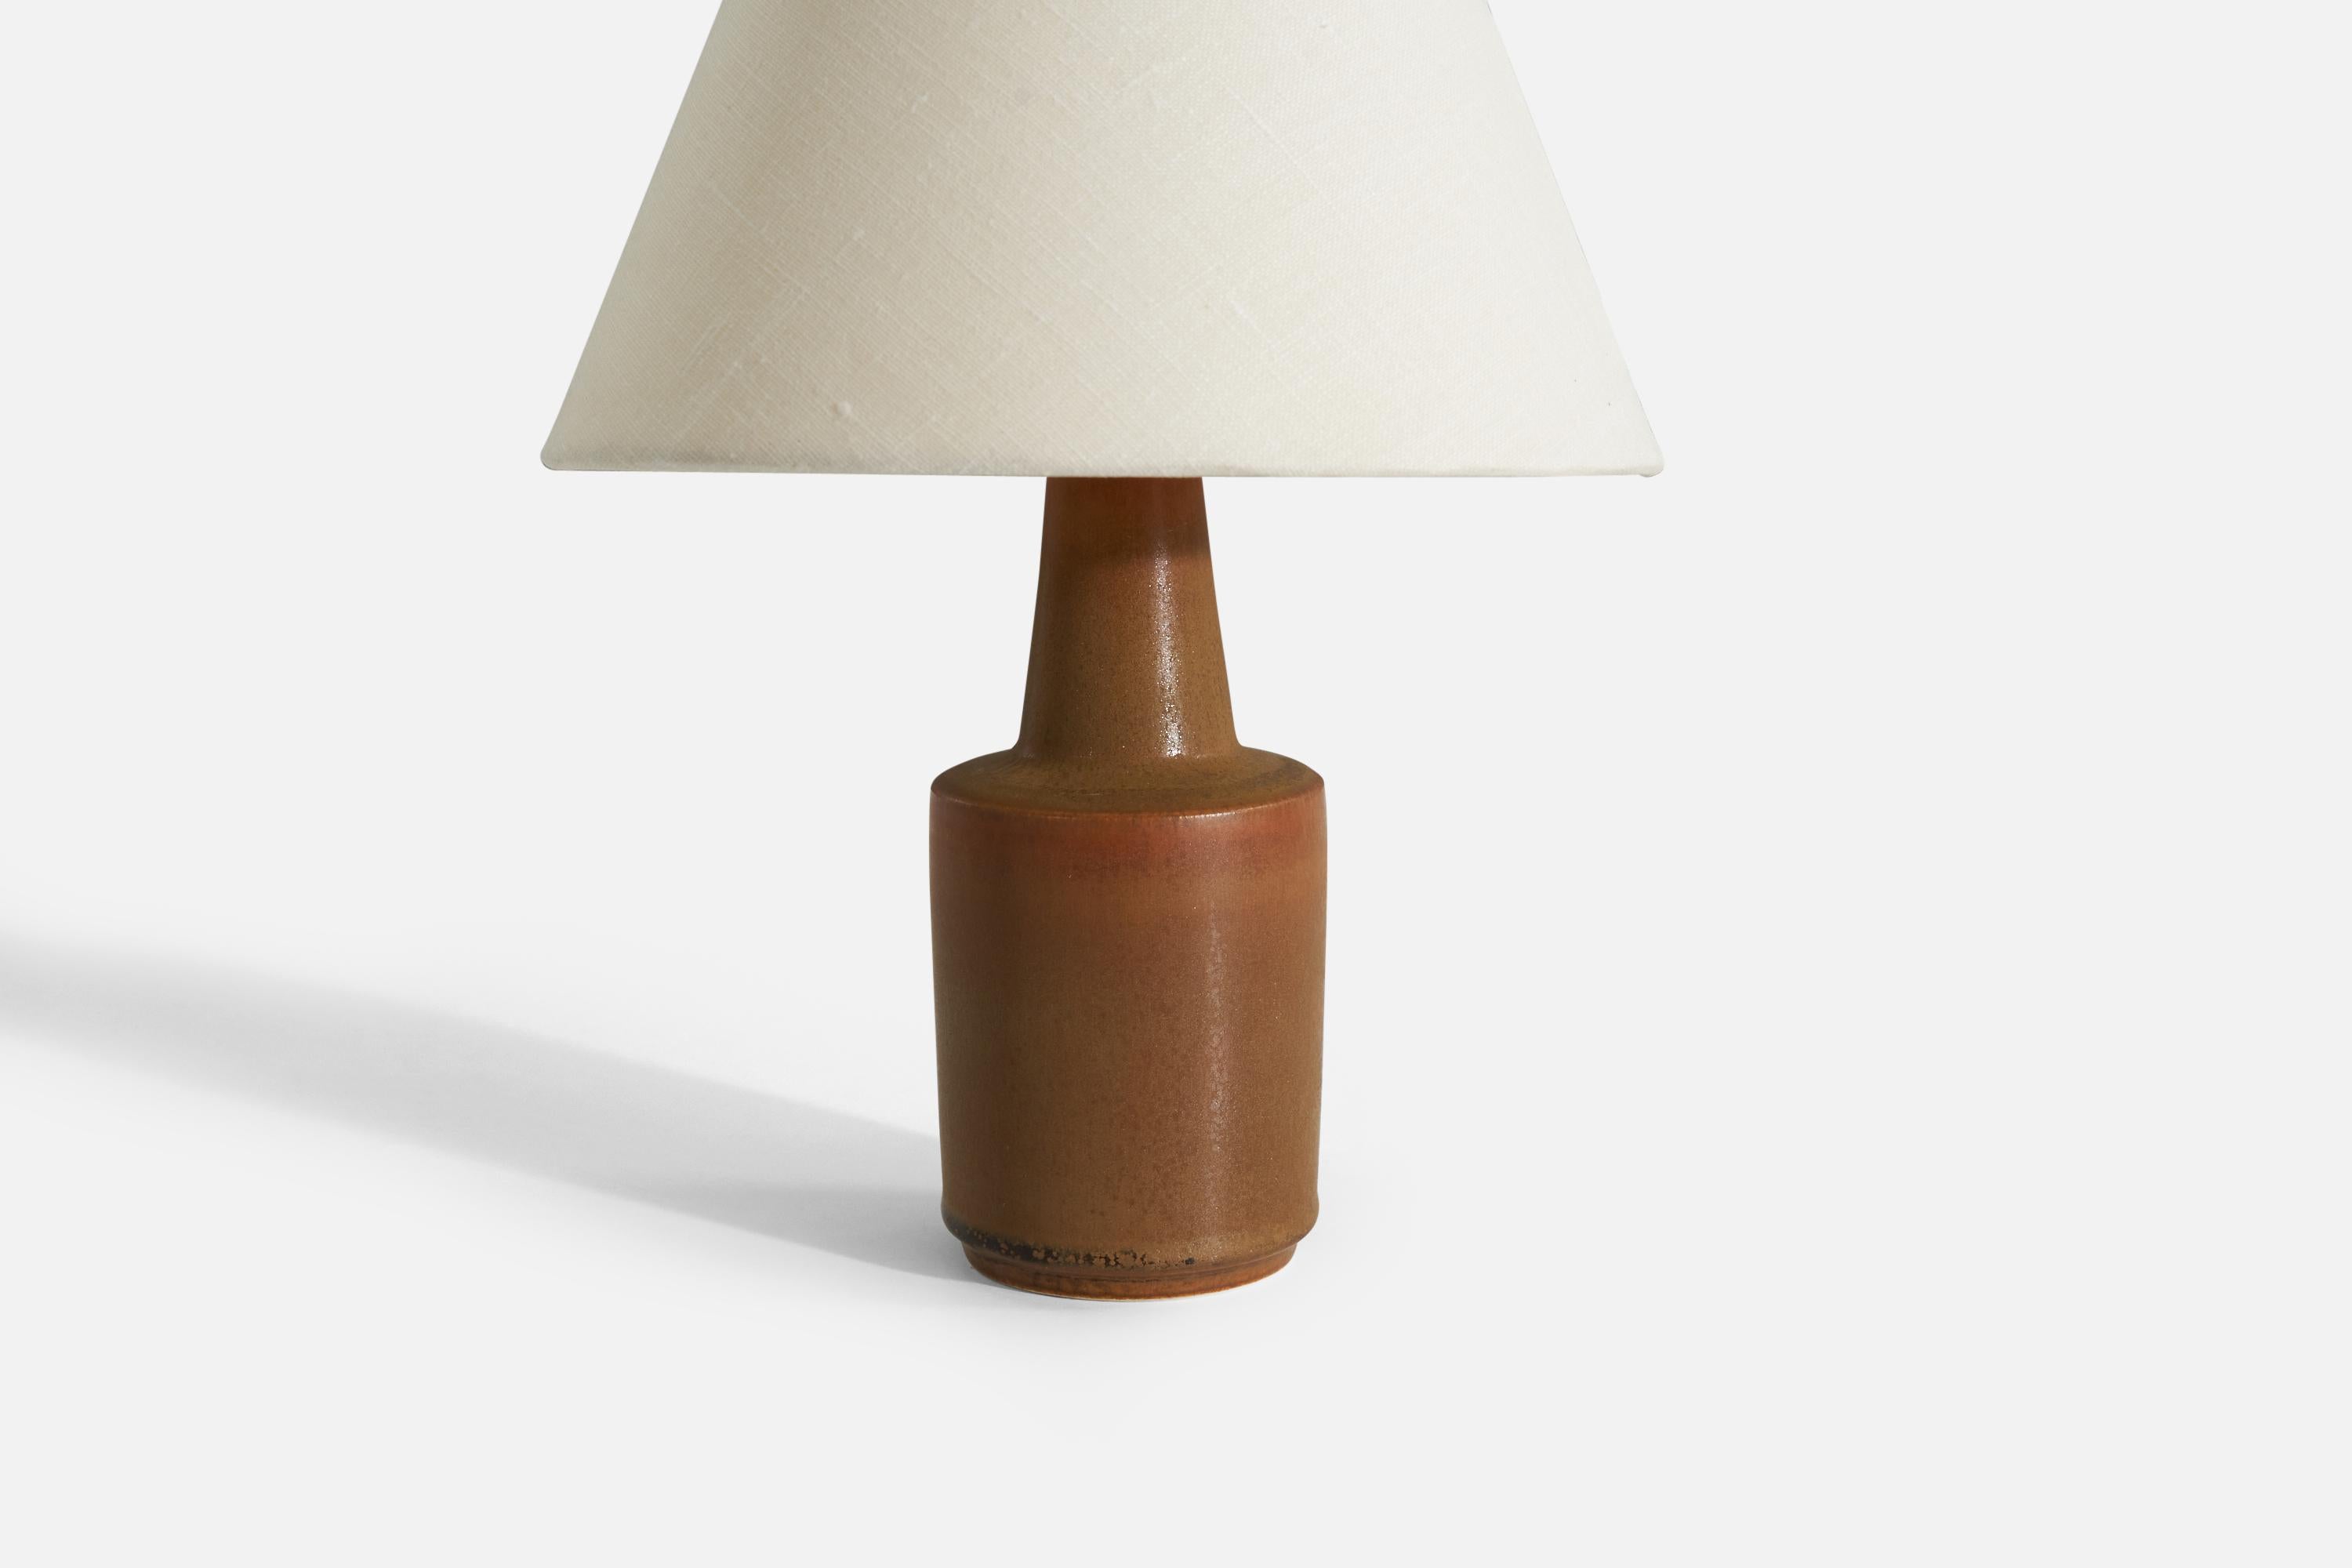 Søholm Stentøj, Table Lamp, Brown-Glazed Stoneware, Denmark, 1960s In Good Condition For Sale In High Point, NC